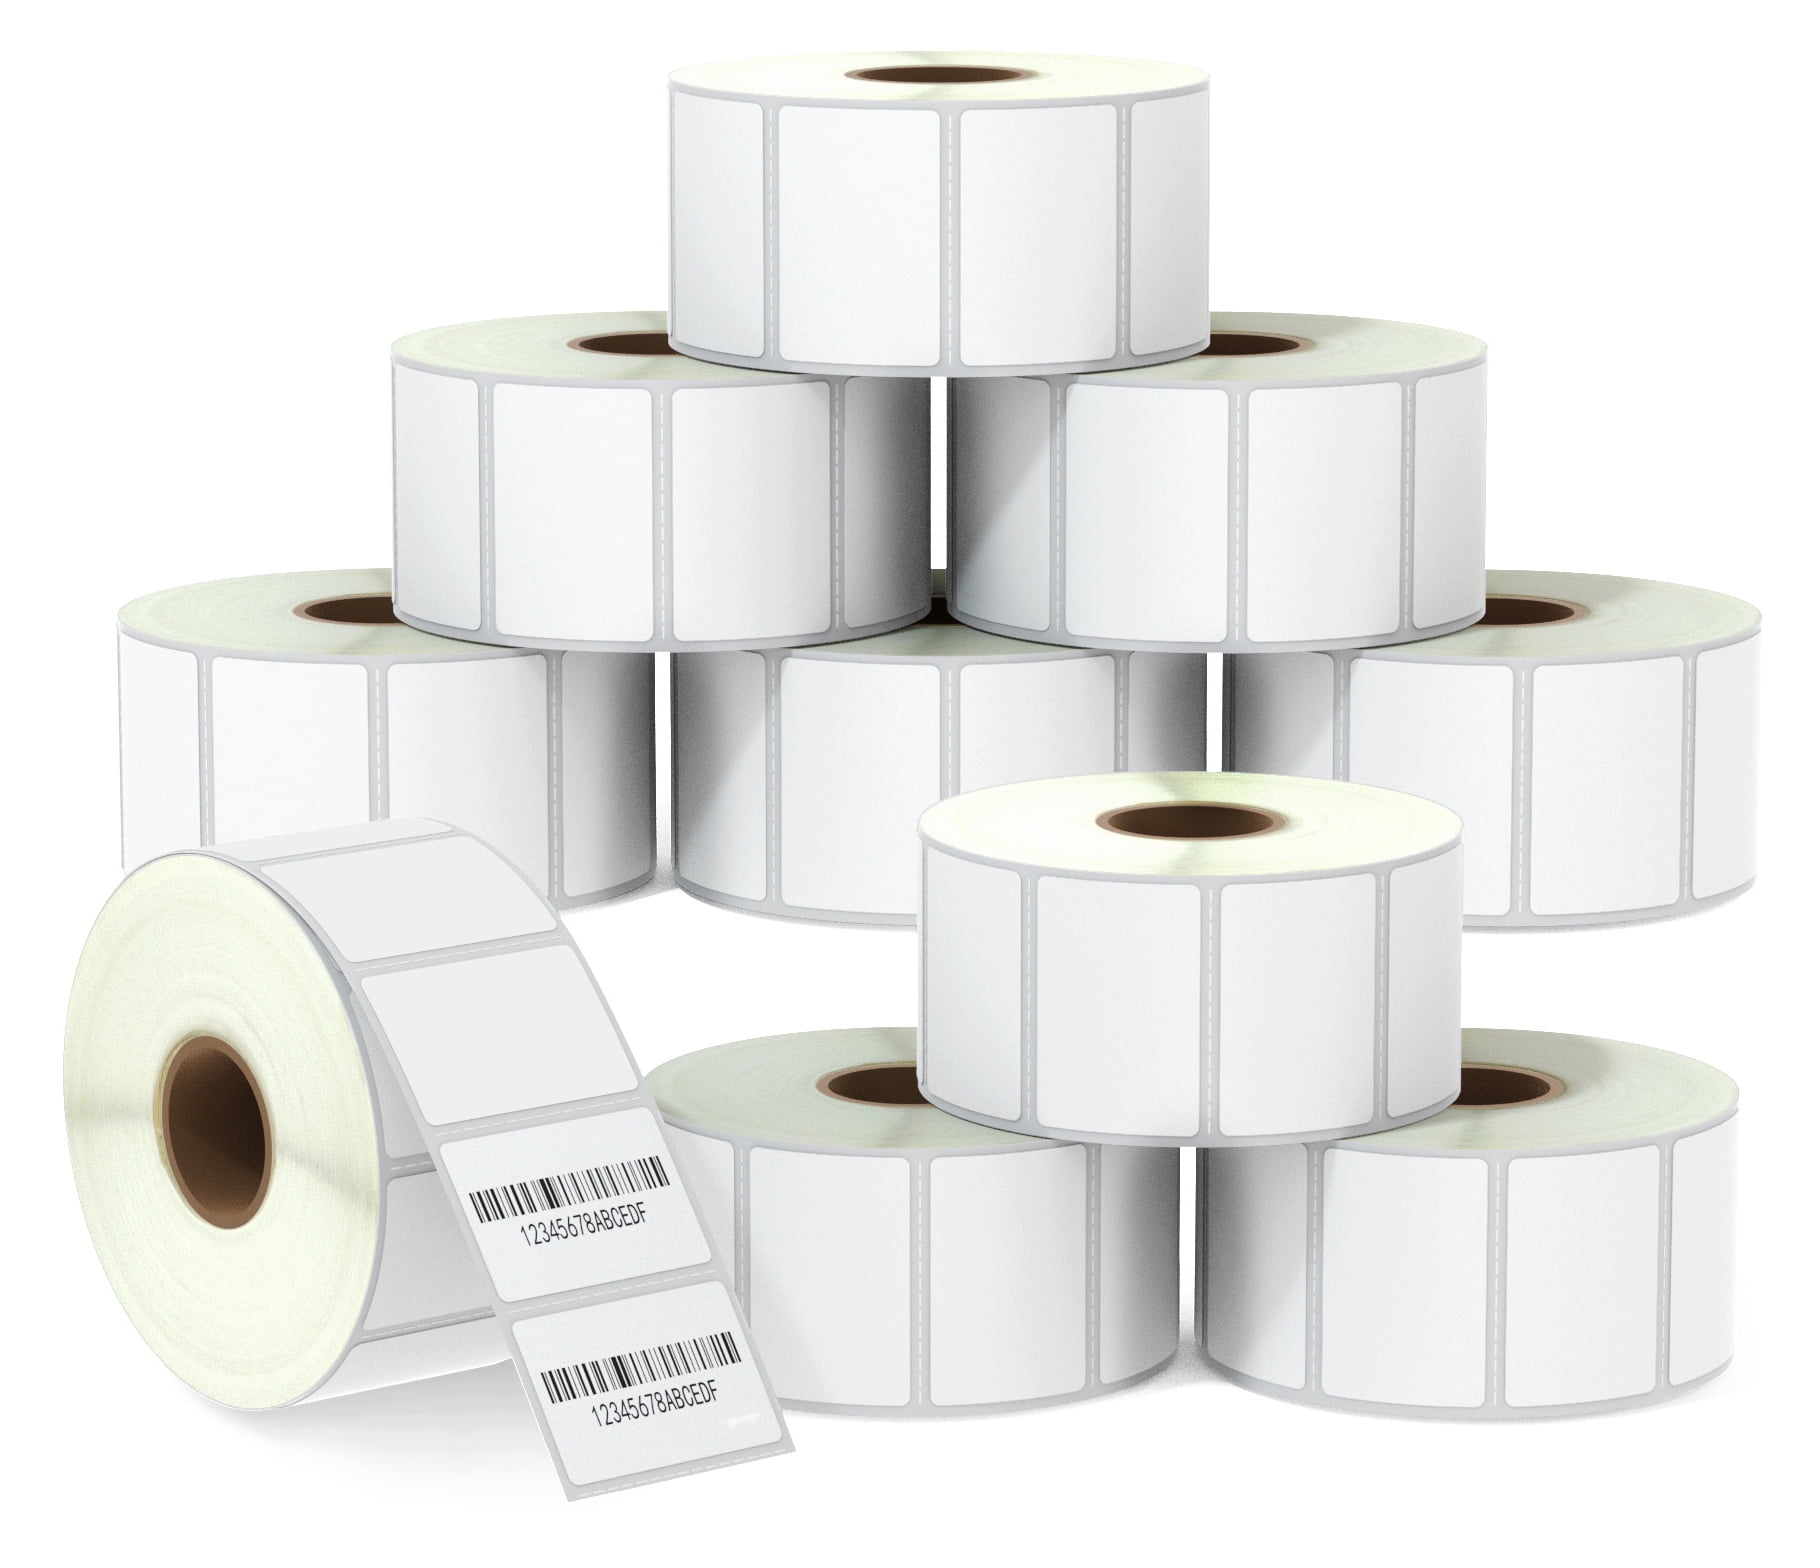 BETCKEY 2 x 1.5 UPC Barcode & Address Labels Compatible with Zebra & Rollo Label Printer,Premium Adhesive & Perforated 10 Rolls, 10000 Labels 